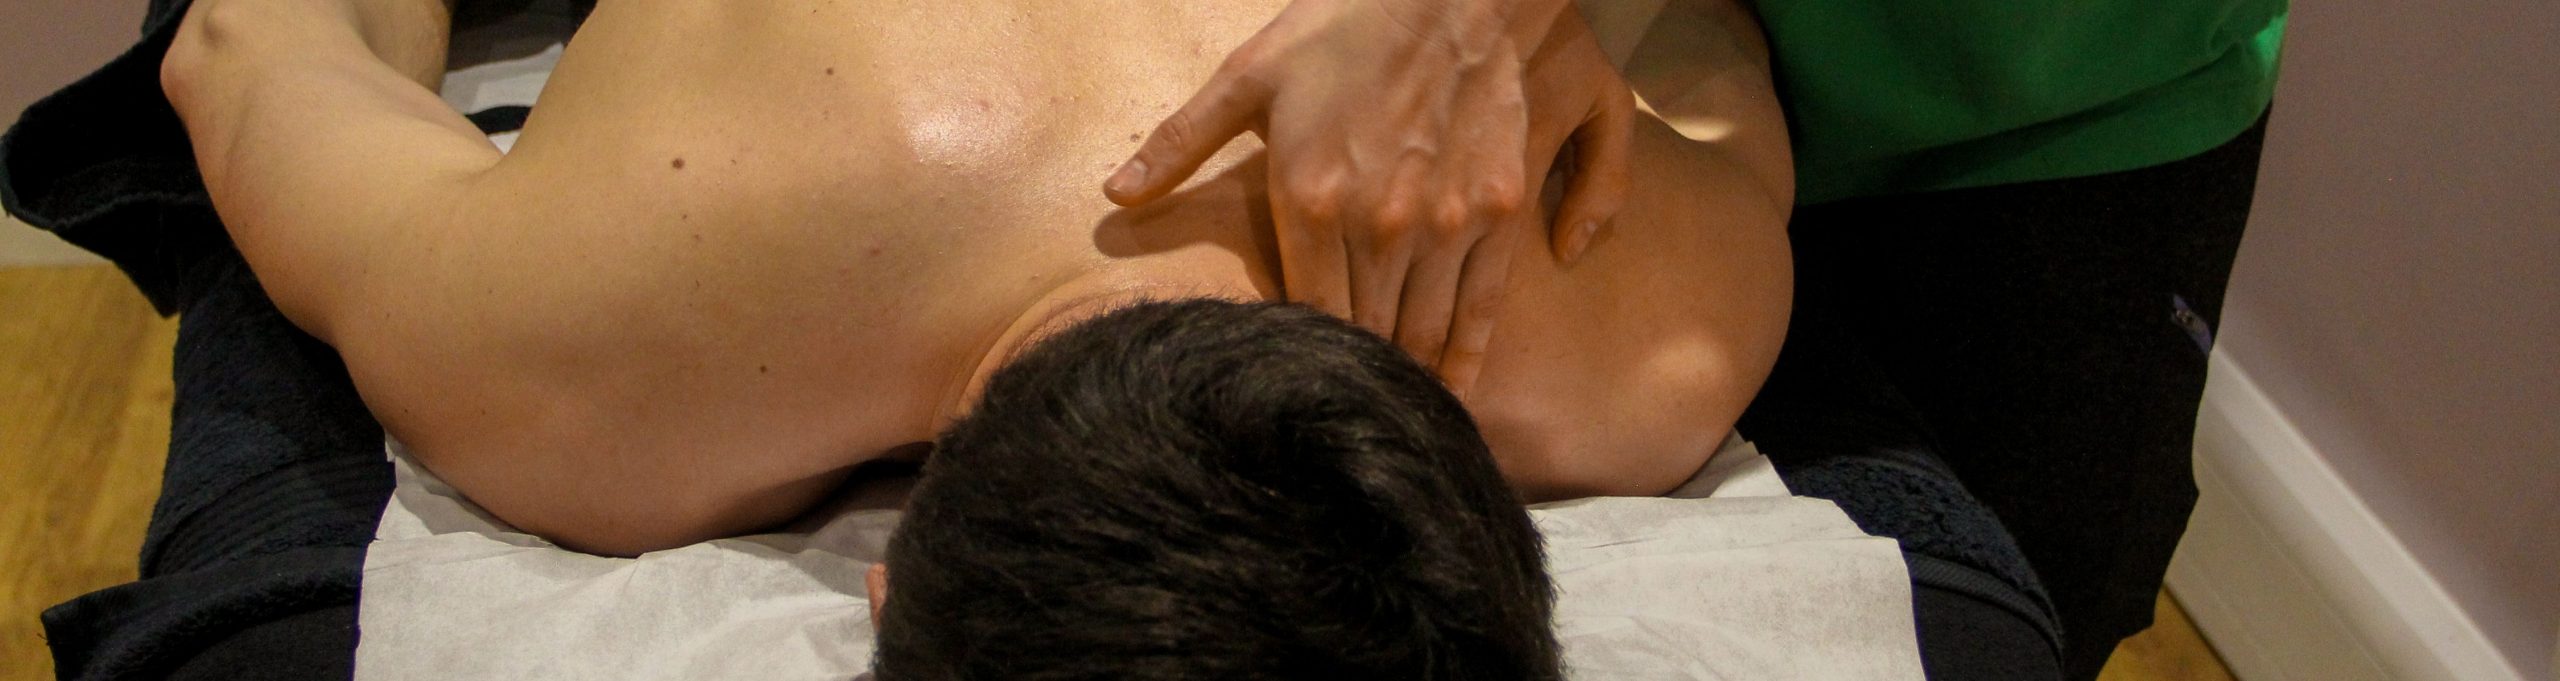 The Benefits Of A Relaxation Massage - Katie Bell